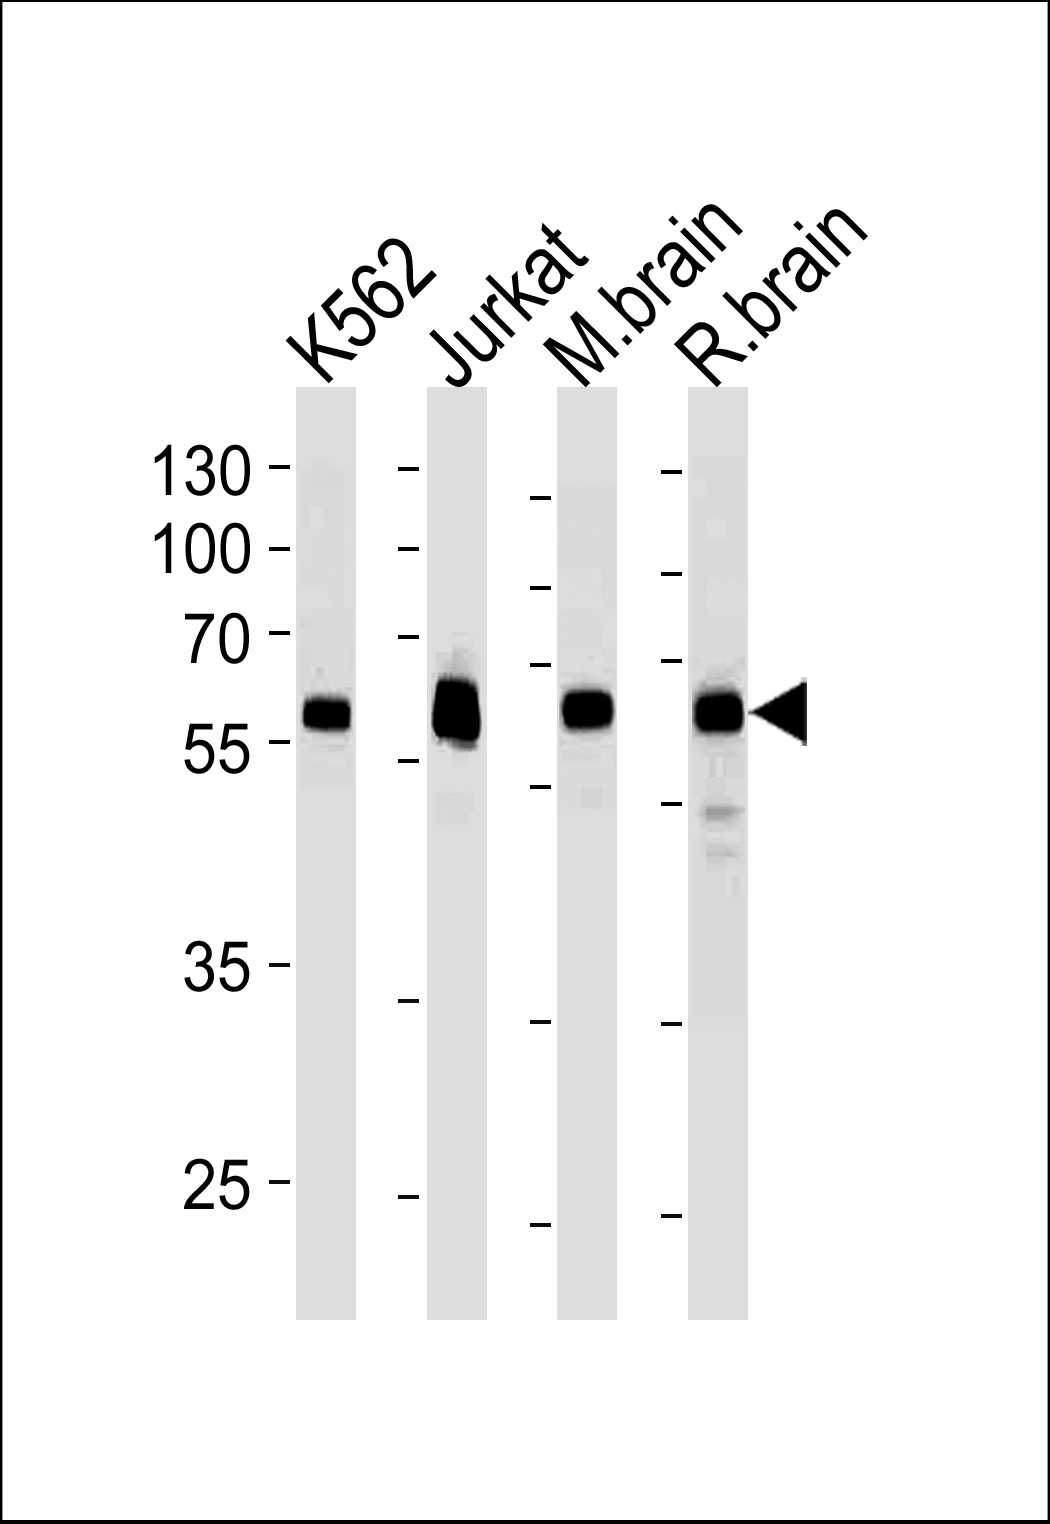 USP14 Antibody (N-term)(Cat. #AM2220b) western blot analysis in k562,Jurkat cell line ,mouse brain and rat brain tissue lysates (35?g/lane).This demonstrates the USP14 antibody detected the USP14 protein (arrow).